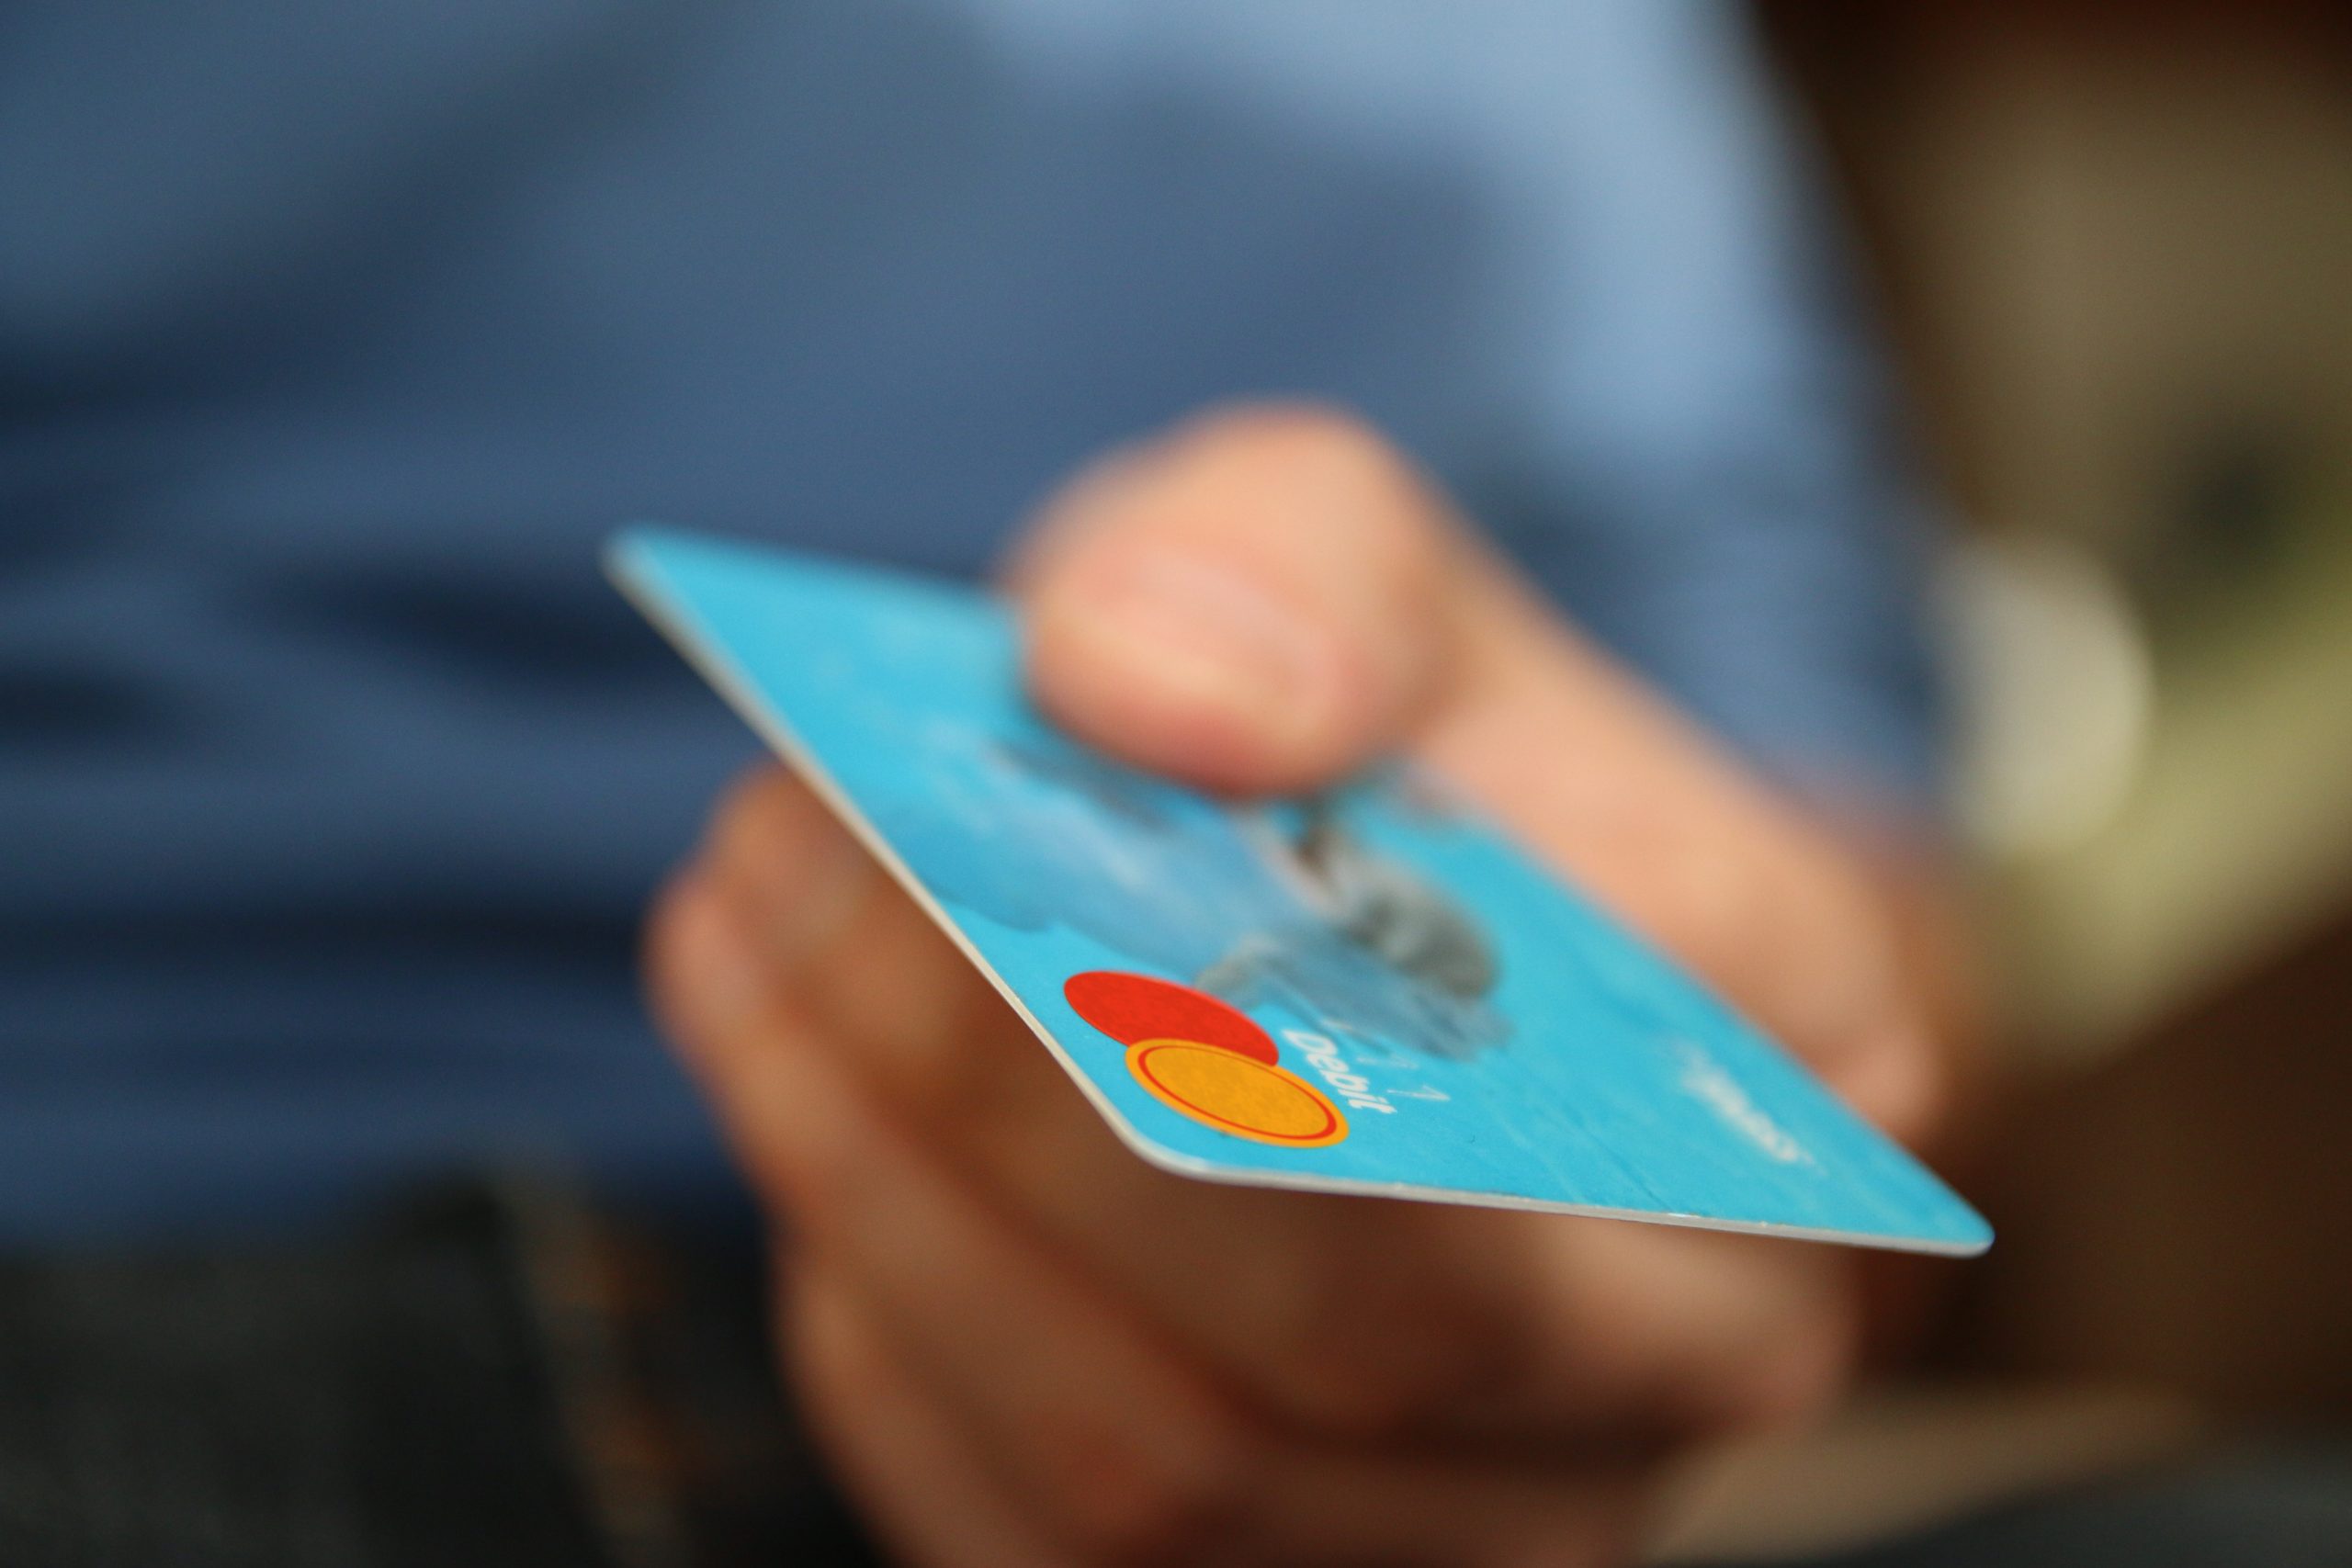 Blurred image of a hand offering a credit card